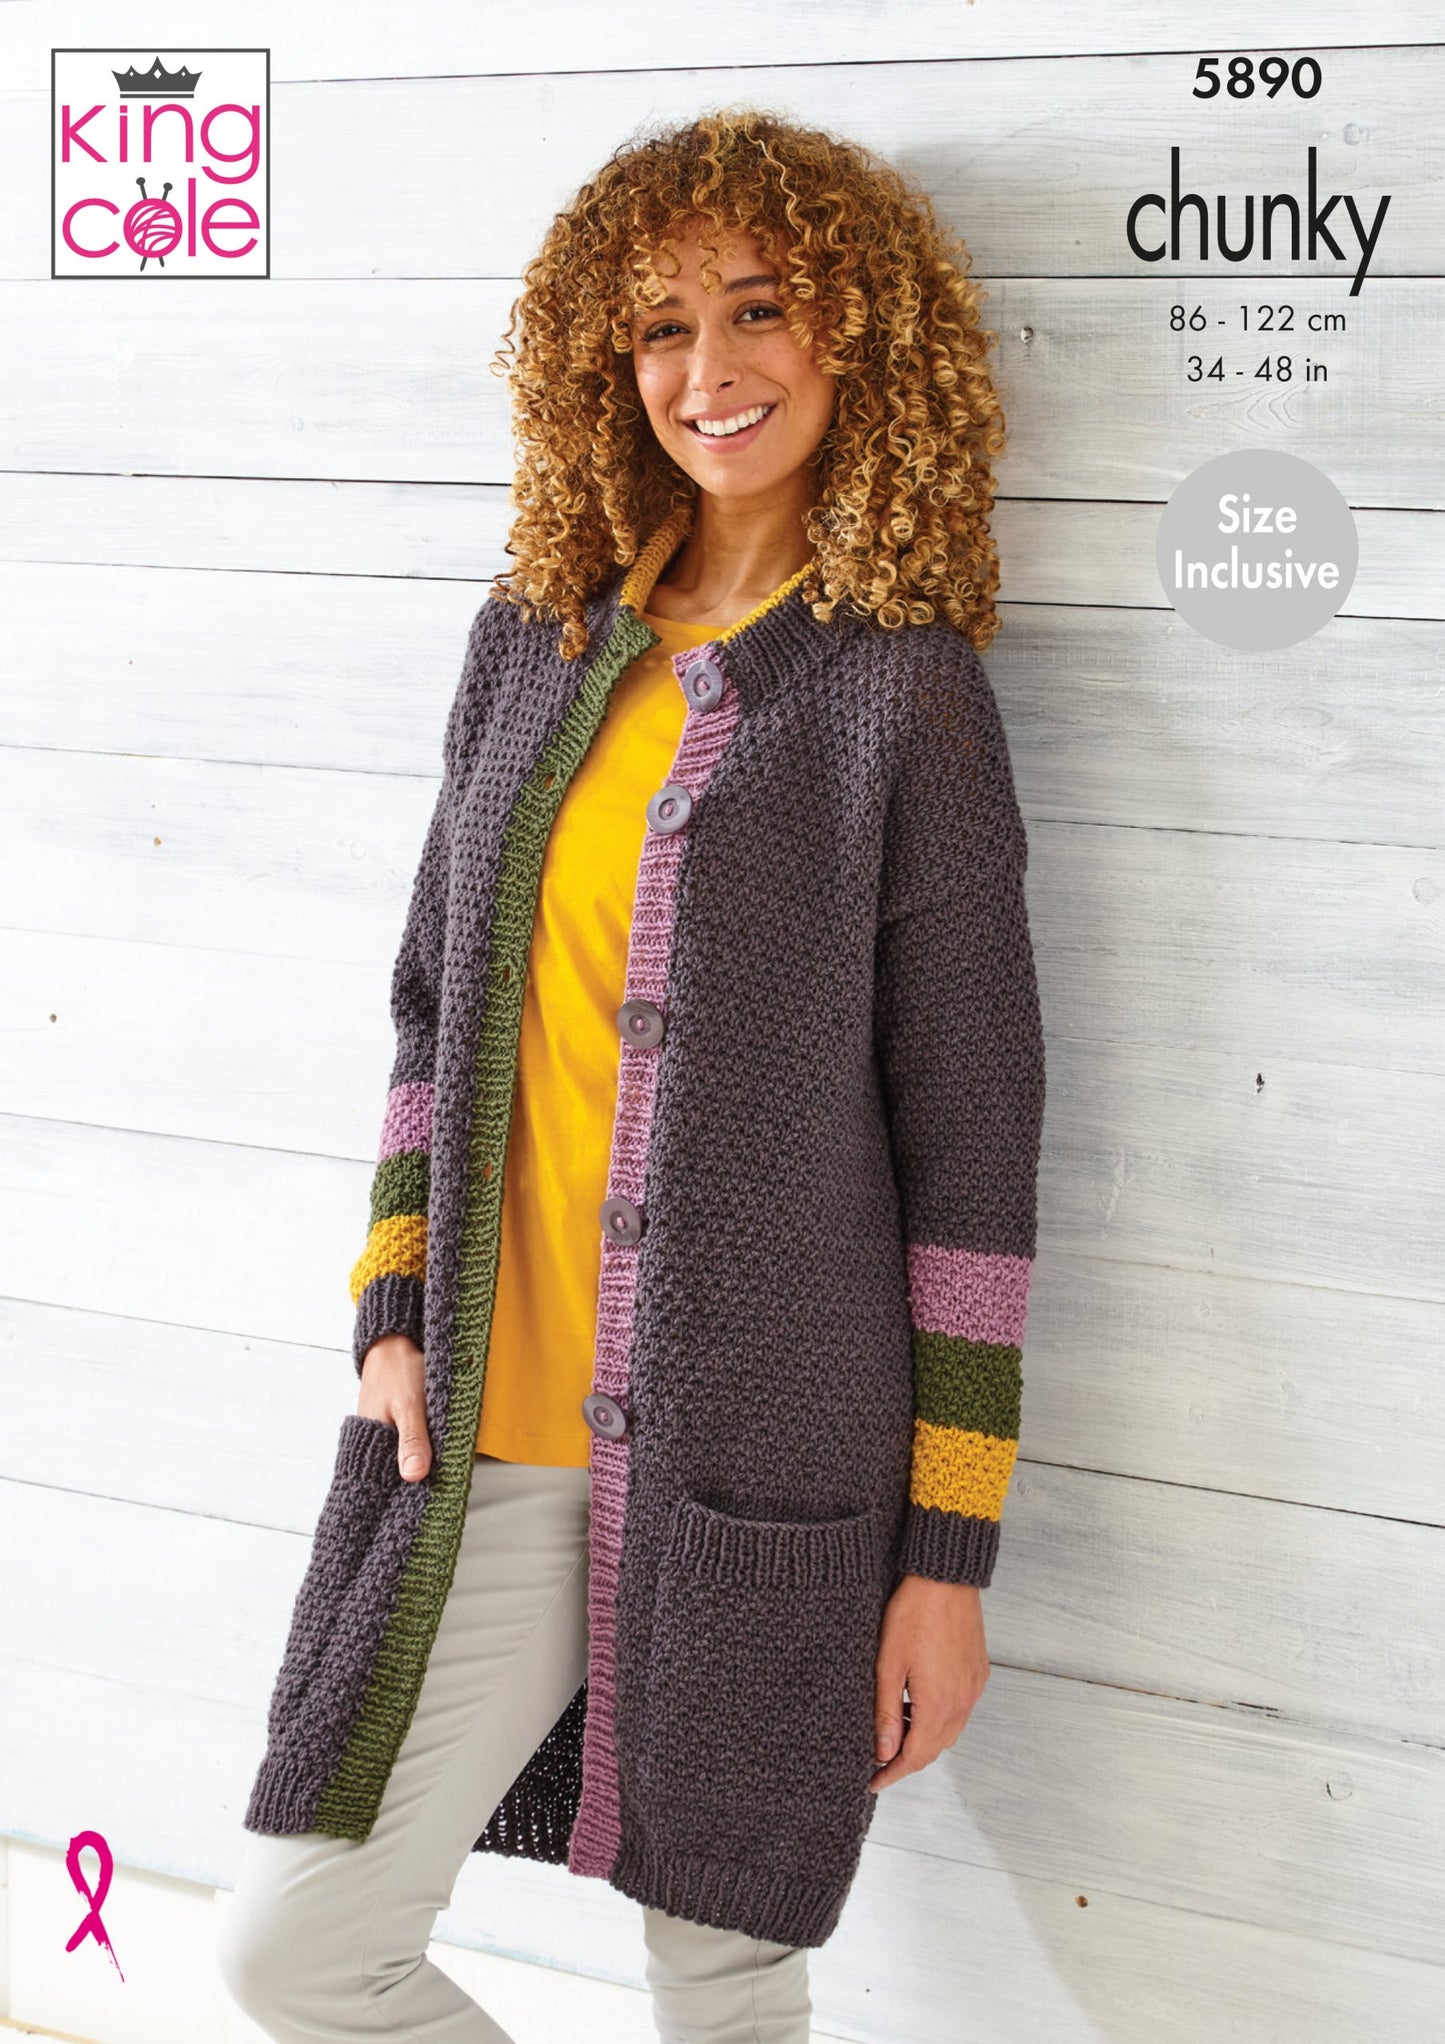 Knitting Pattern 5890 - Cardigan/Coats Knitted in King Cole Wildwood Chunky